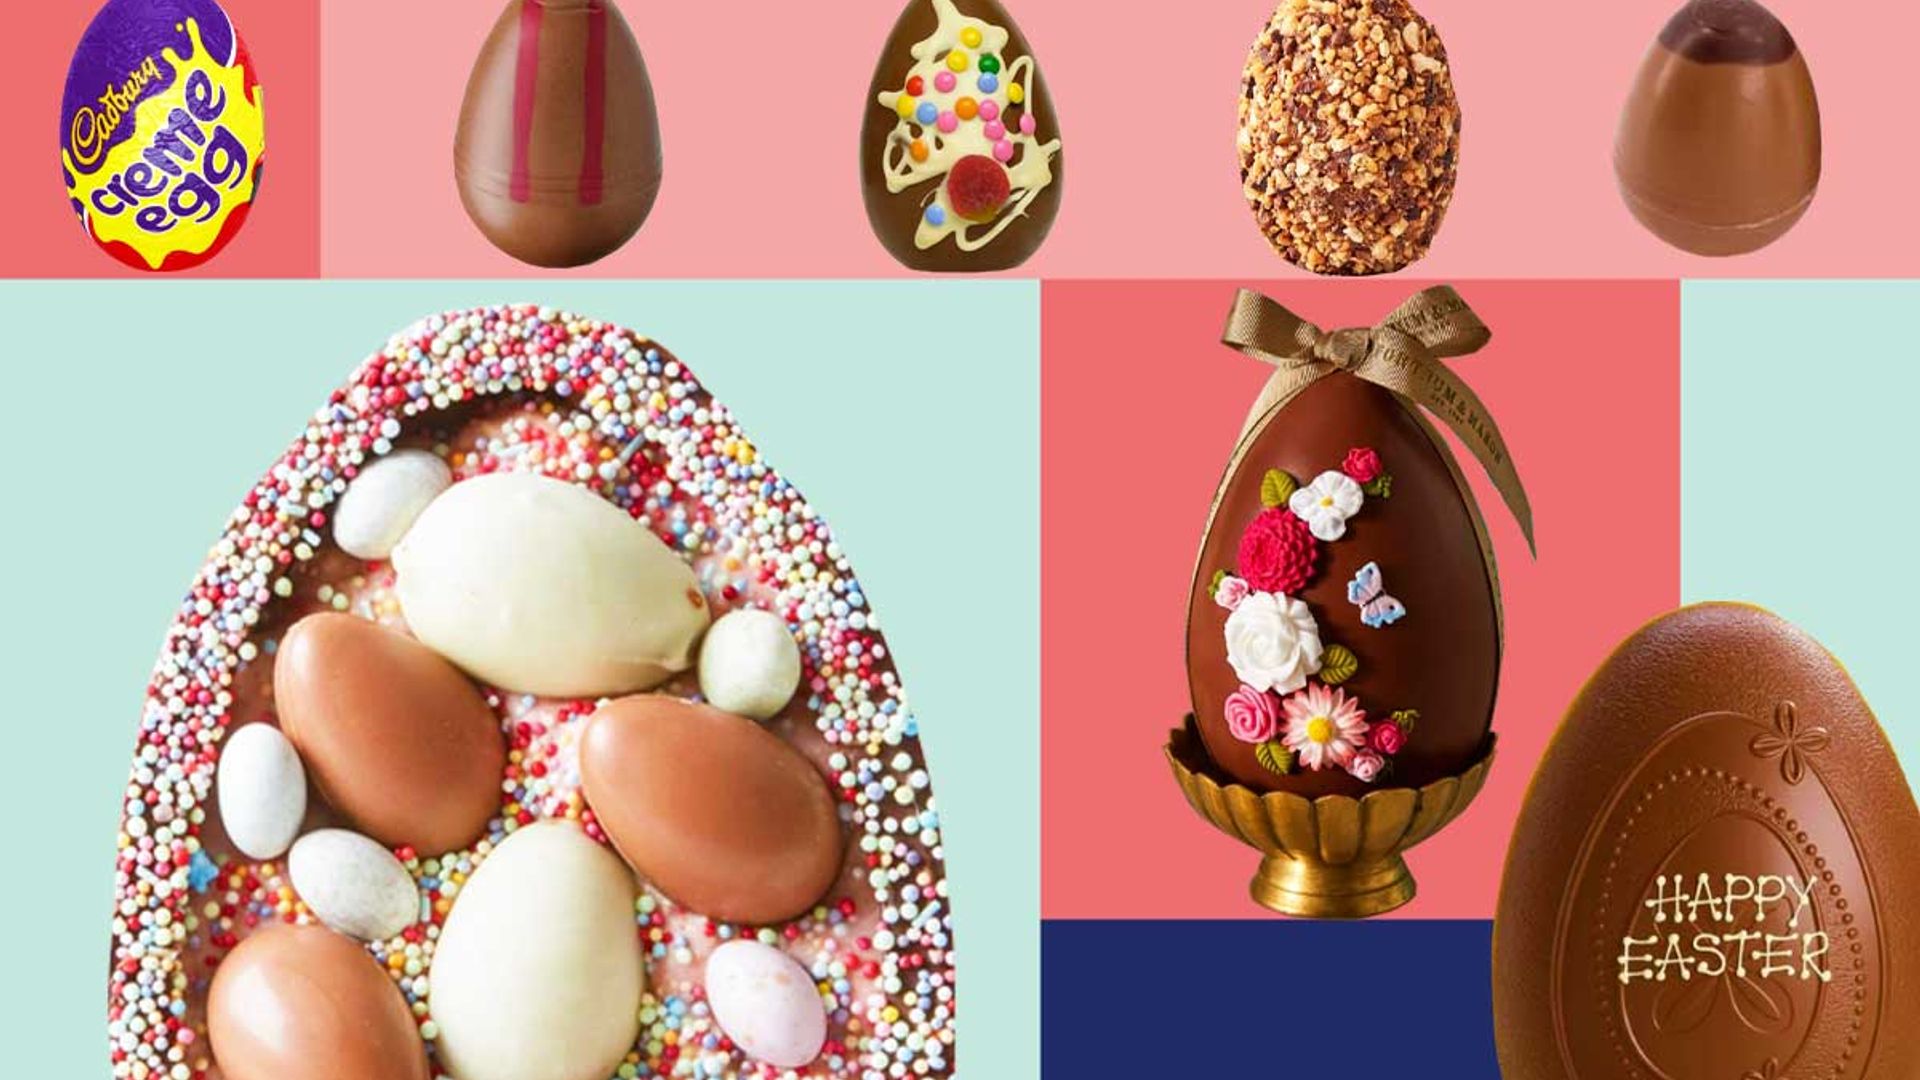 Best Easter Eggs 20 From Cadbury to Galaxy, Thorntons and Marks ...